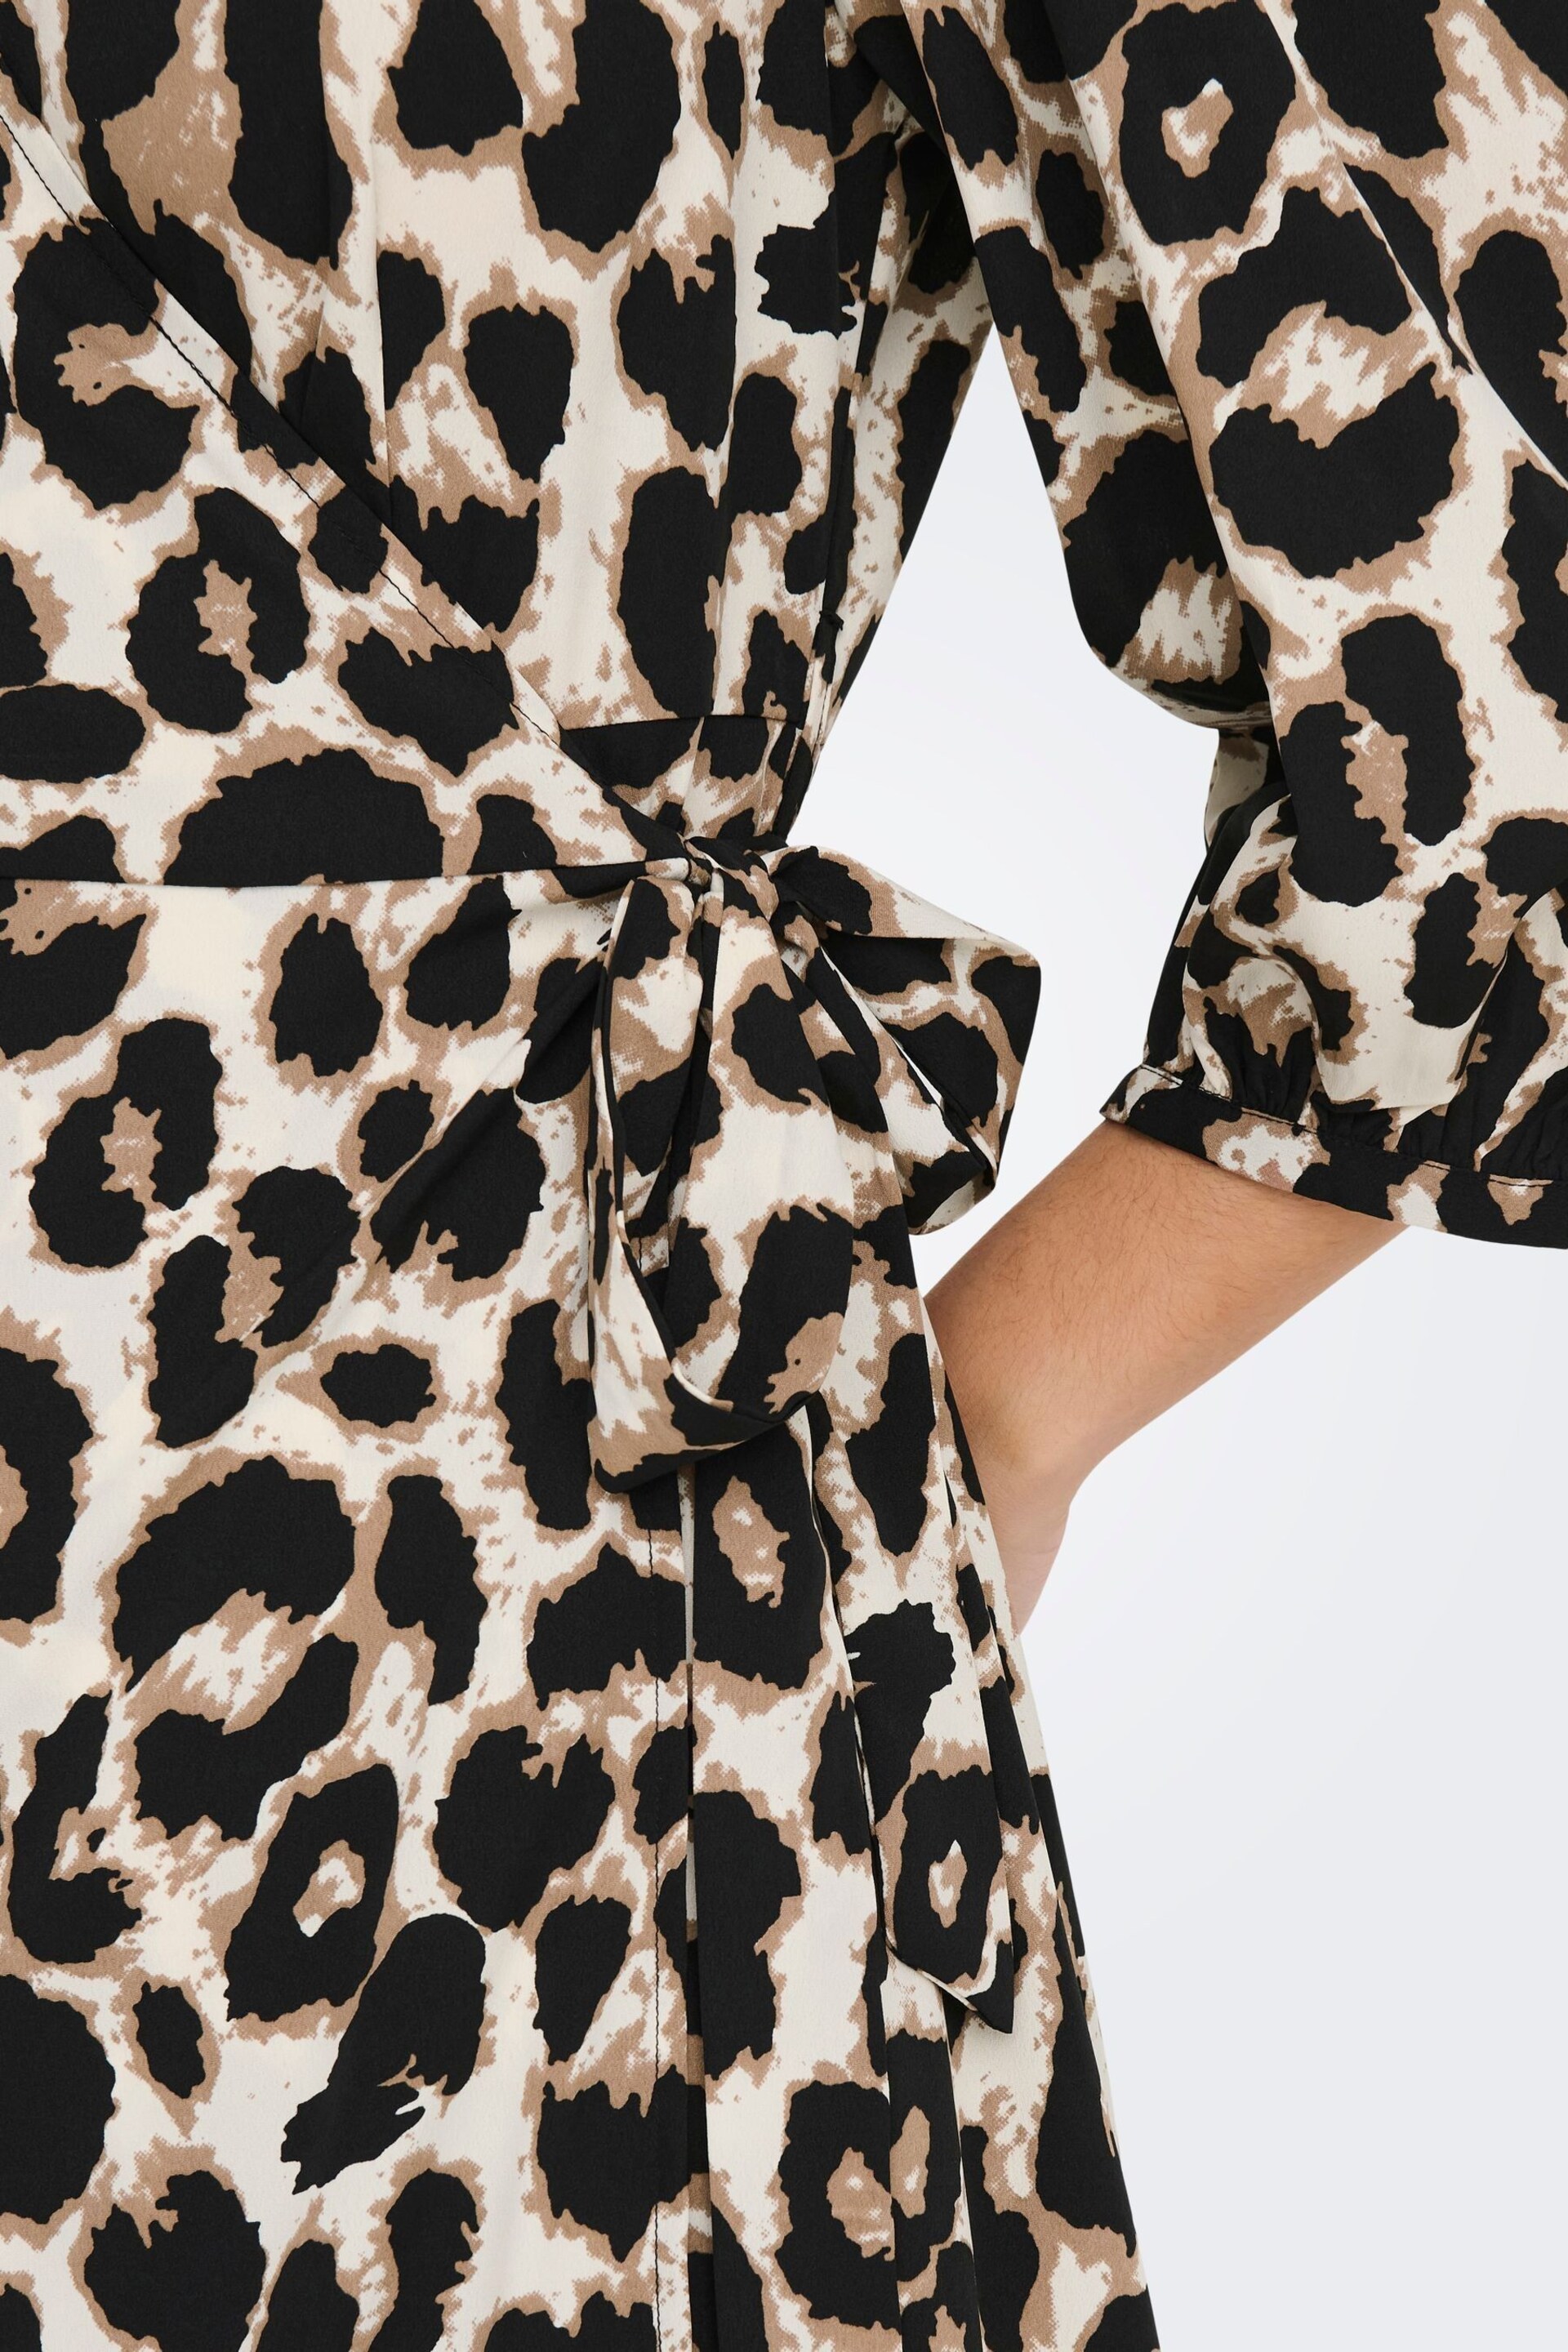 ONLY Leopard Print Long Sleeve Wrap Midi Dress - Image 4 of 5